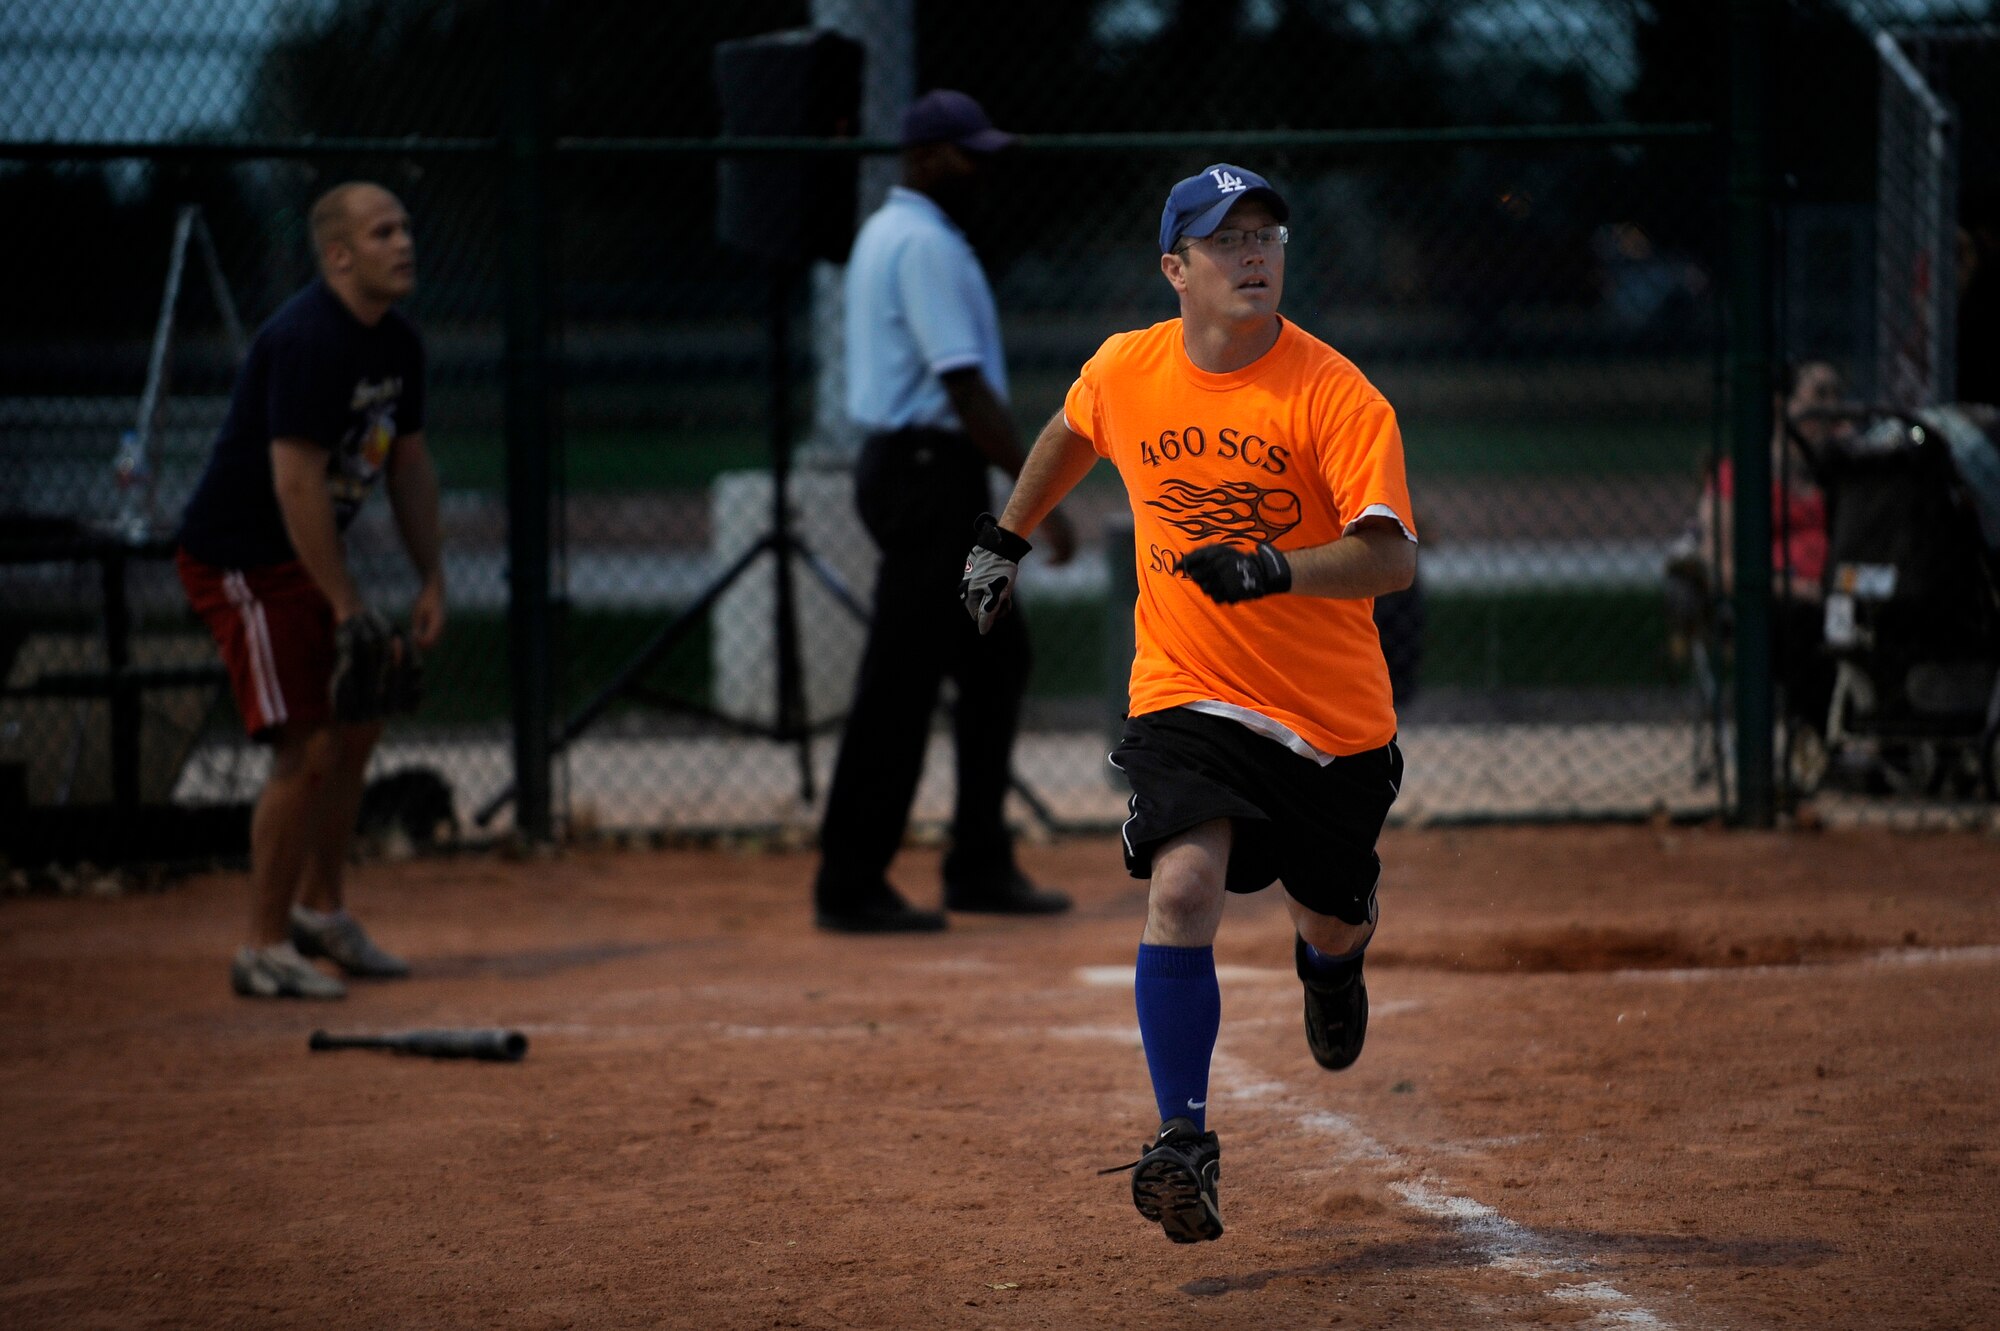 BUCKLEY AIR FORCE BASE, Colo. – Robert Shaw, 460th Space Communications Squadron, runs to first after a hit during the softball finals Sept. 14. The 460th Space Communications Squadron beat Naval Information Operations Command – Colorado 16-6 and 13-3 in a double elimination base championship final.  (U.S. Air Force photo by Senior Airman Steven Czyz)